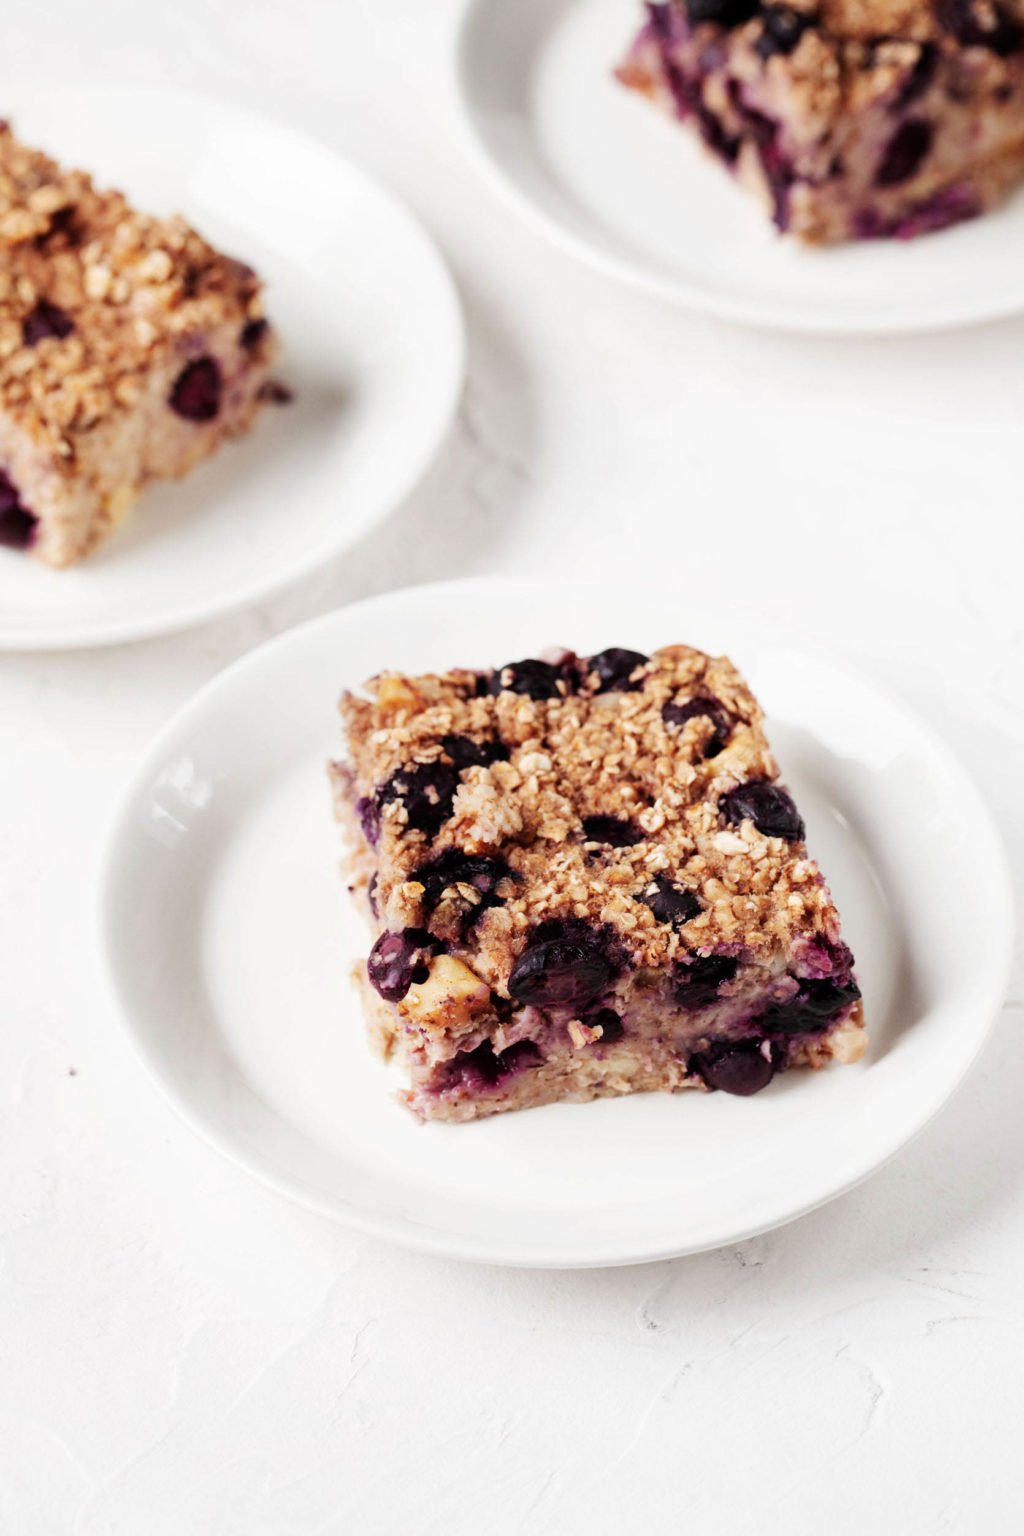 Three small white plates are holding a vegan oat bake with blueberries and banana.